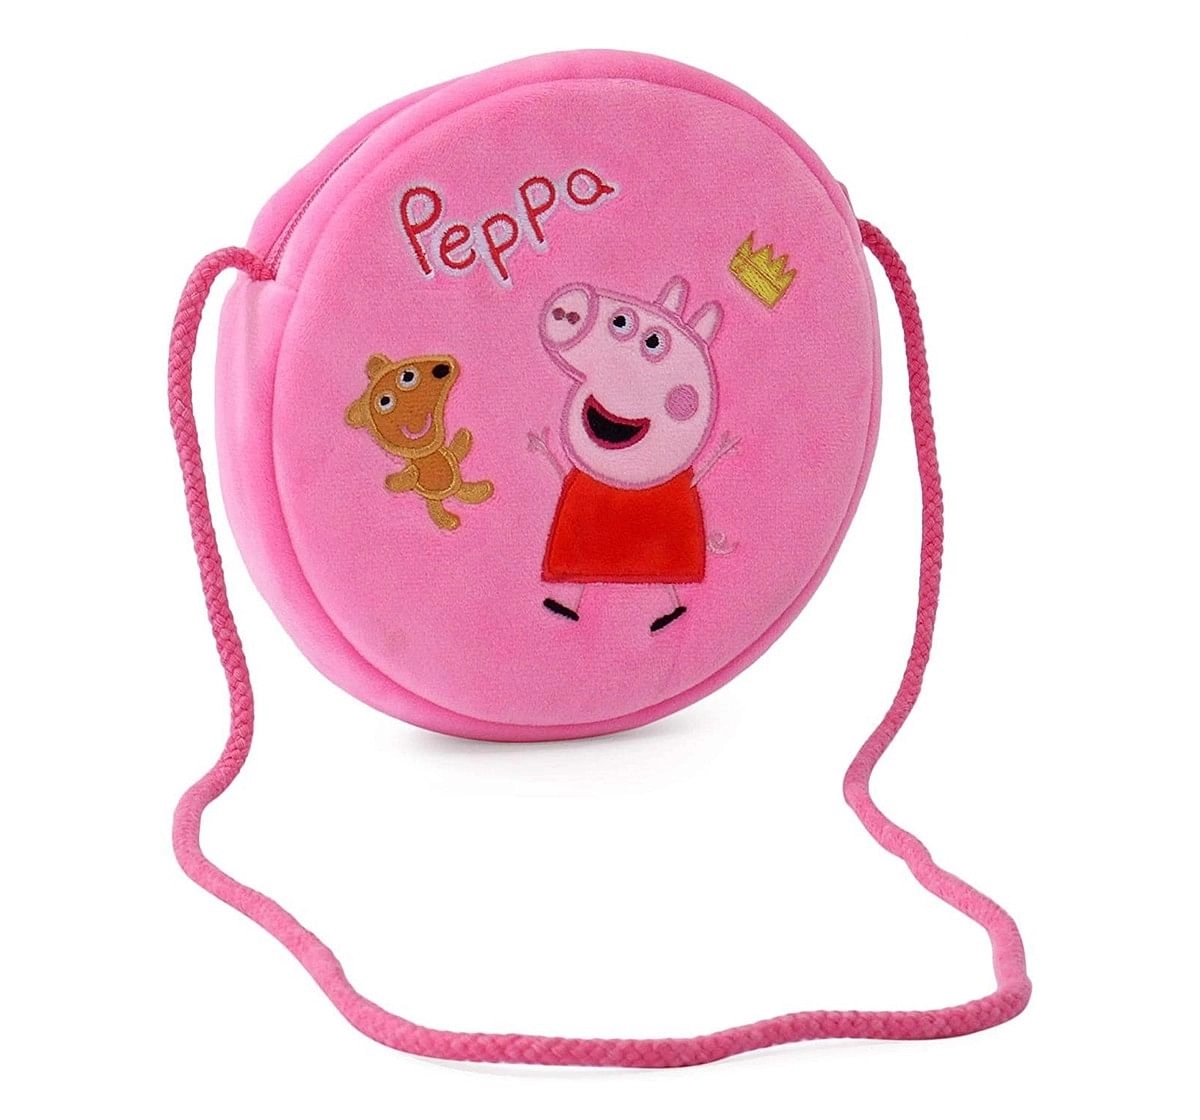 Peppa Pig with Bear Round Sling Bag Plush Accessory for age 3Y+ - 16 Cm (Pink)